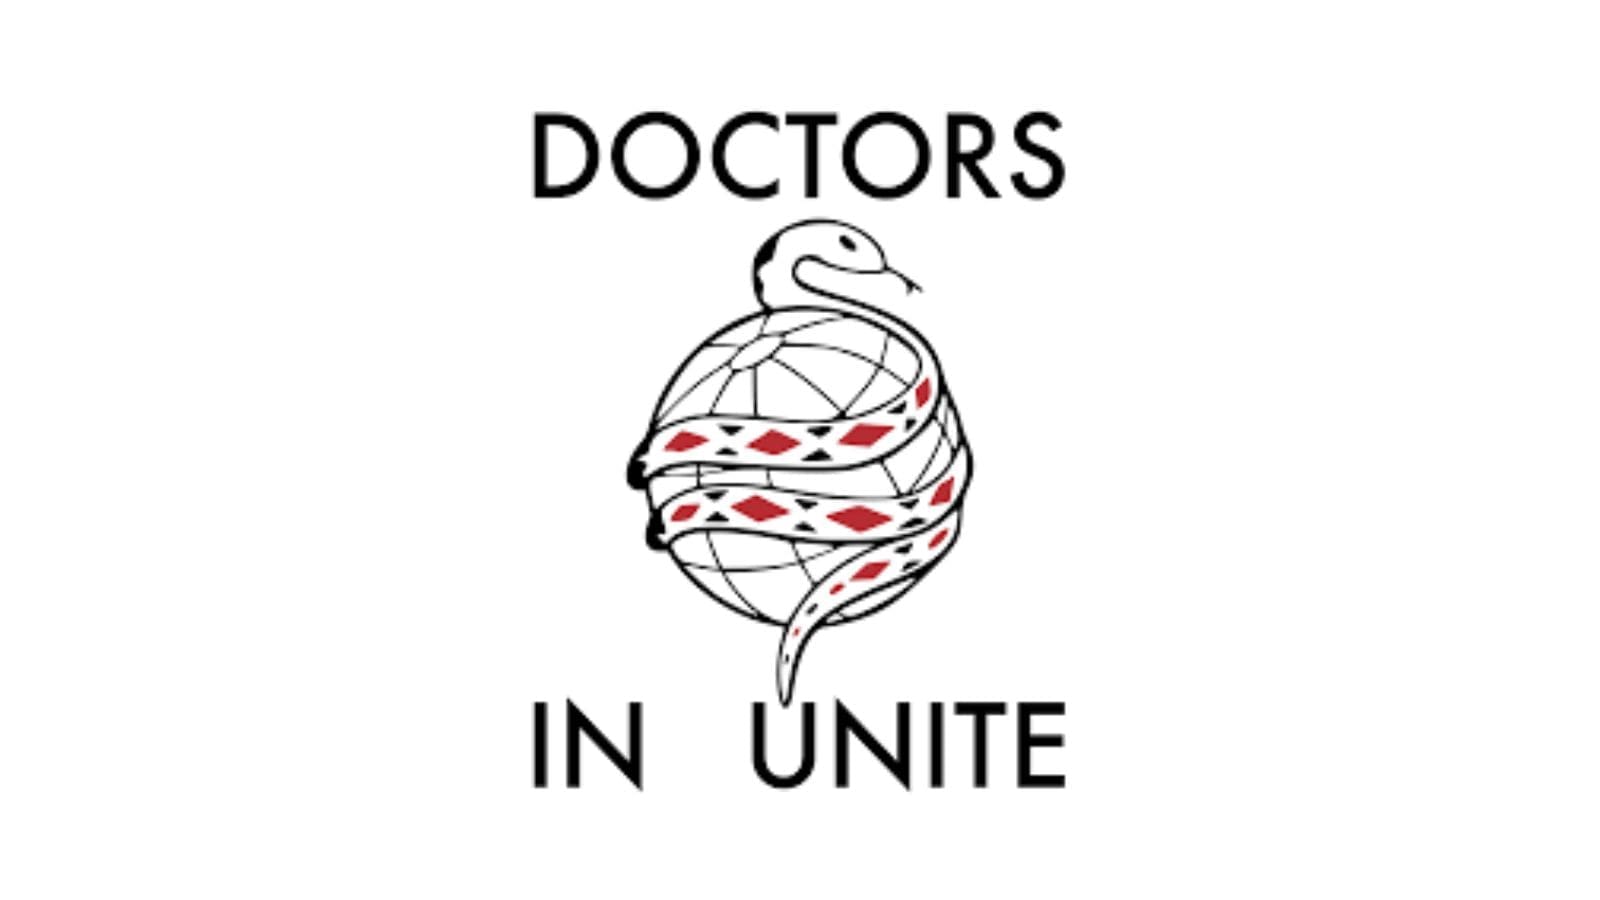 The word "DOCTORS" and underneath is a snake with red and black patches around a globe. Under this is the words "IN UNITE".